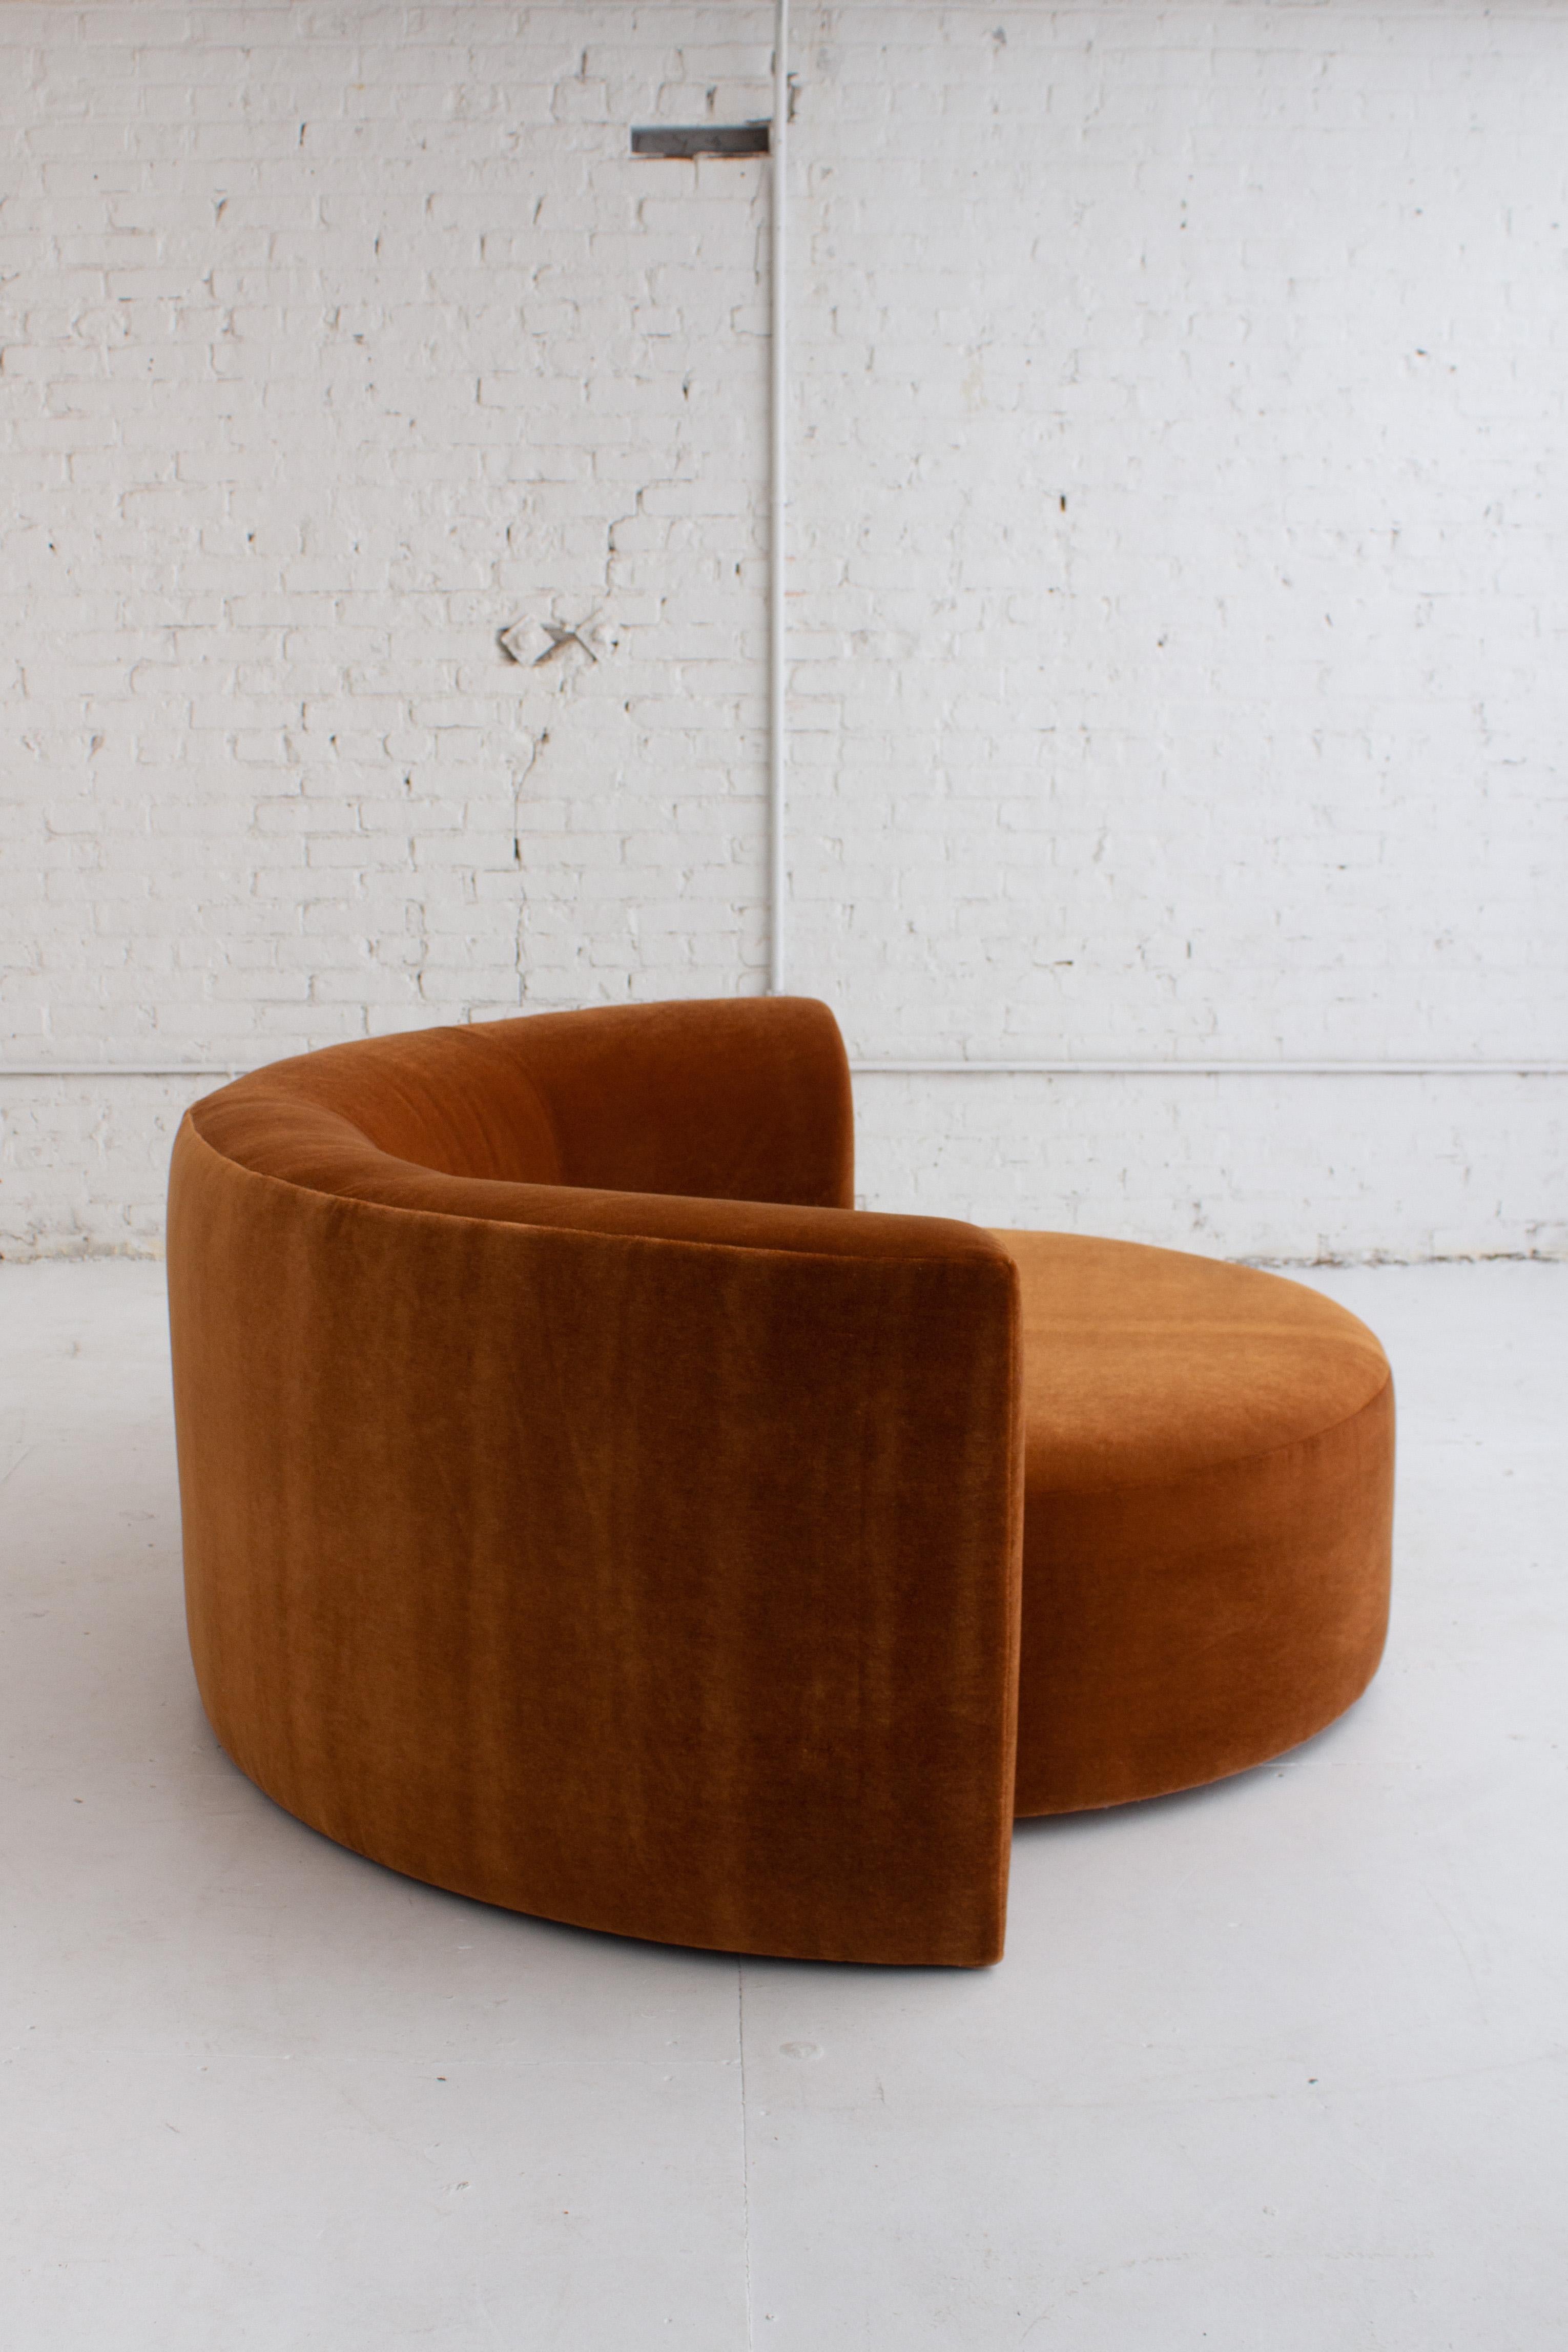 Circular Chaise Lounge in Mohair by Roger Rougier 1